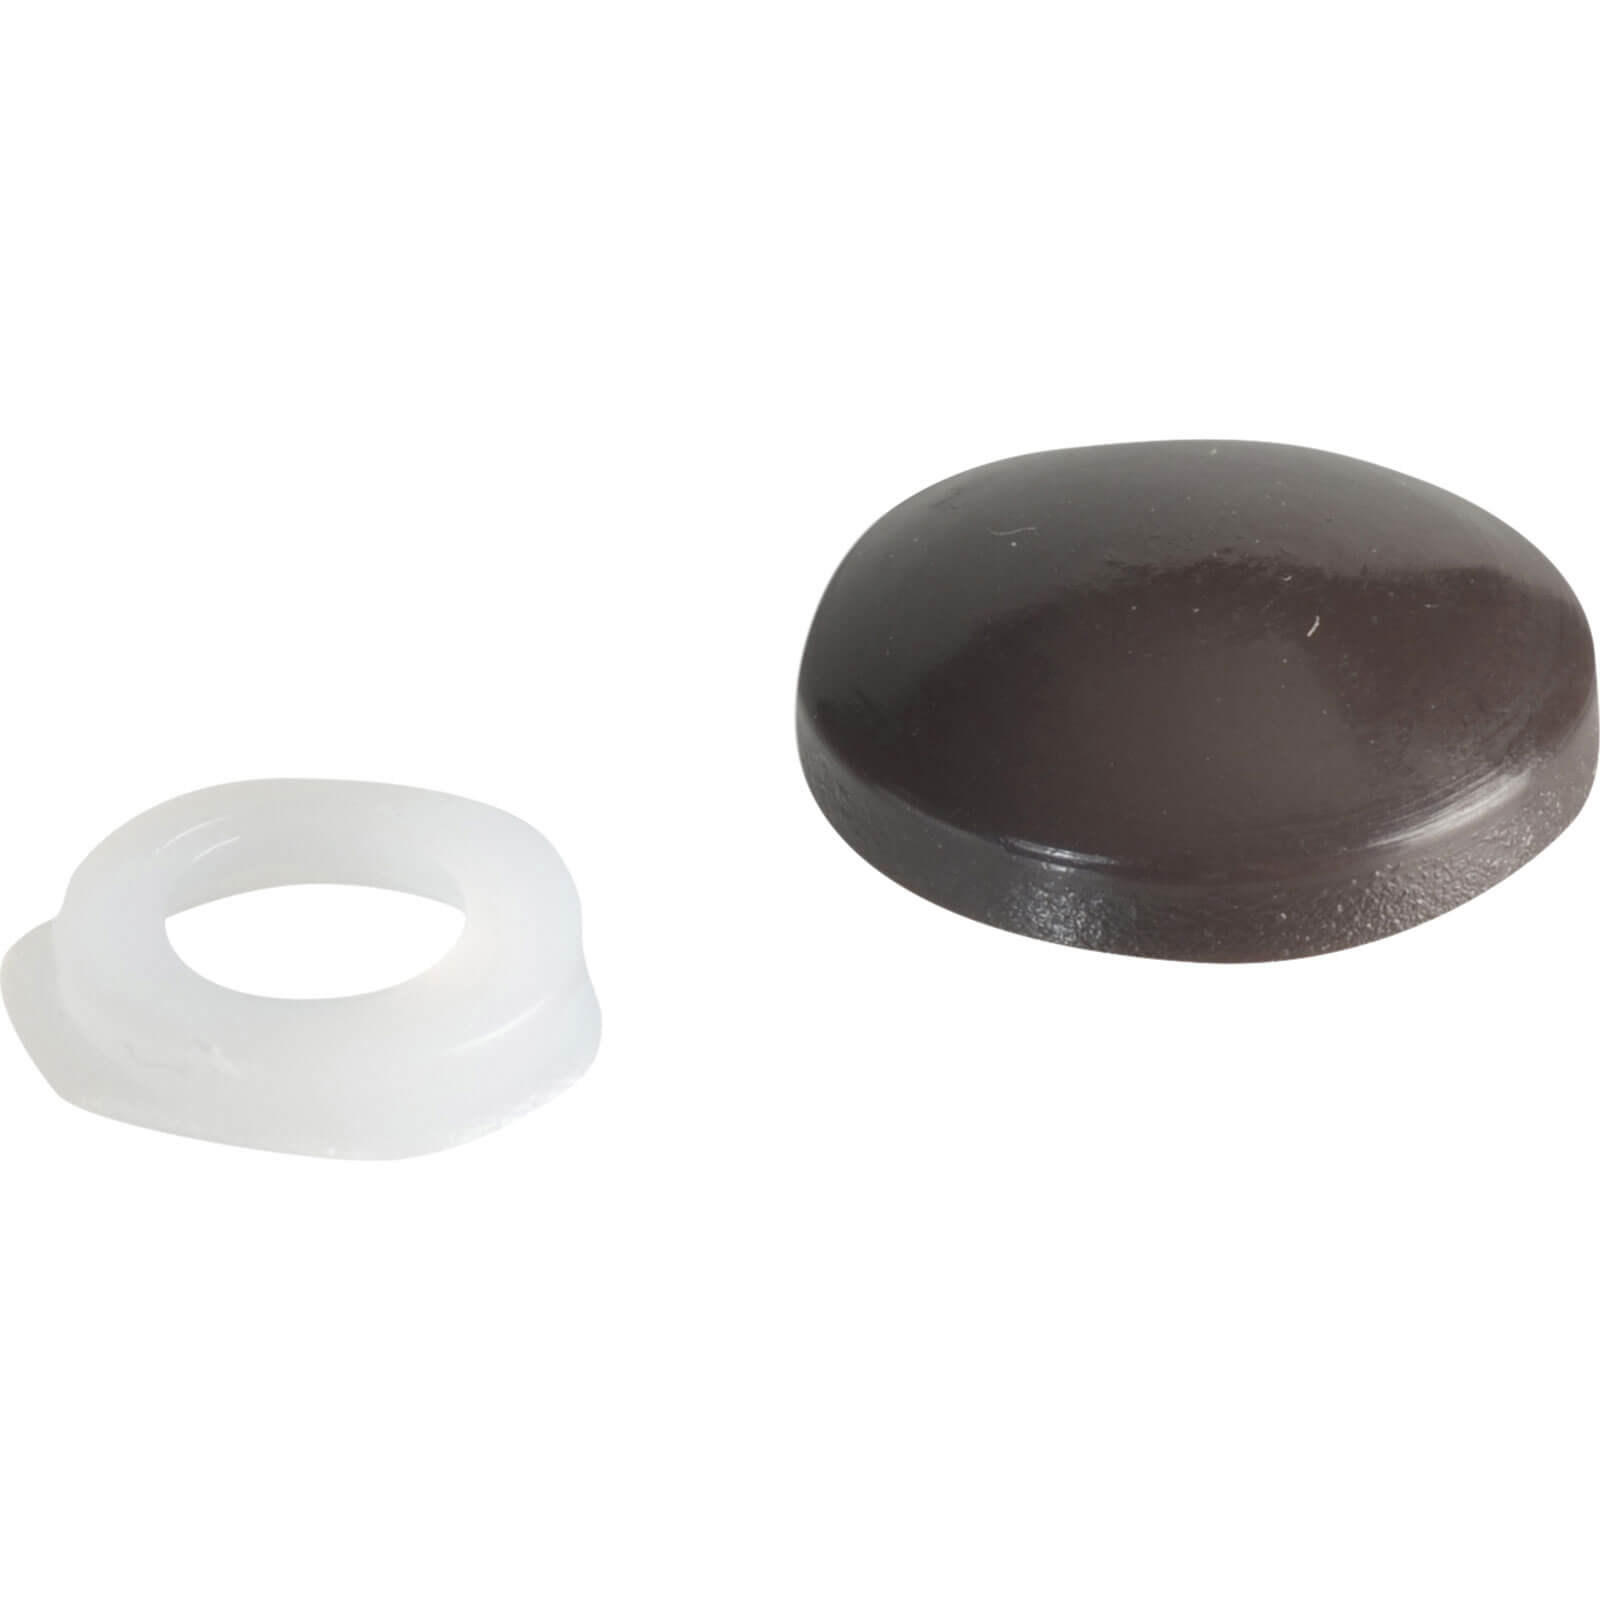 Photo of Forgefix Domed Screw Cover Caps Dark Brown Pack Of 20